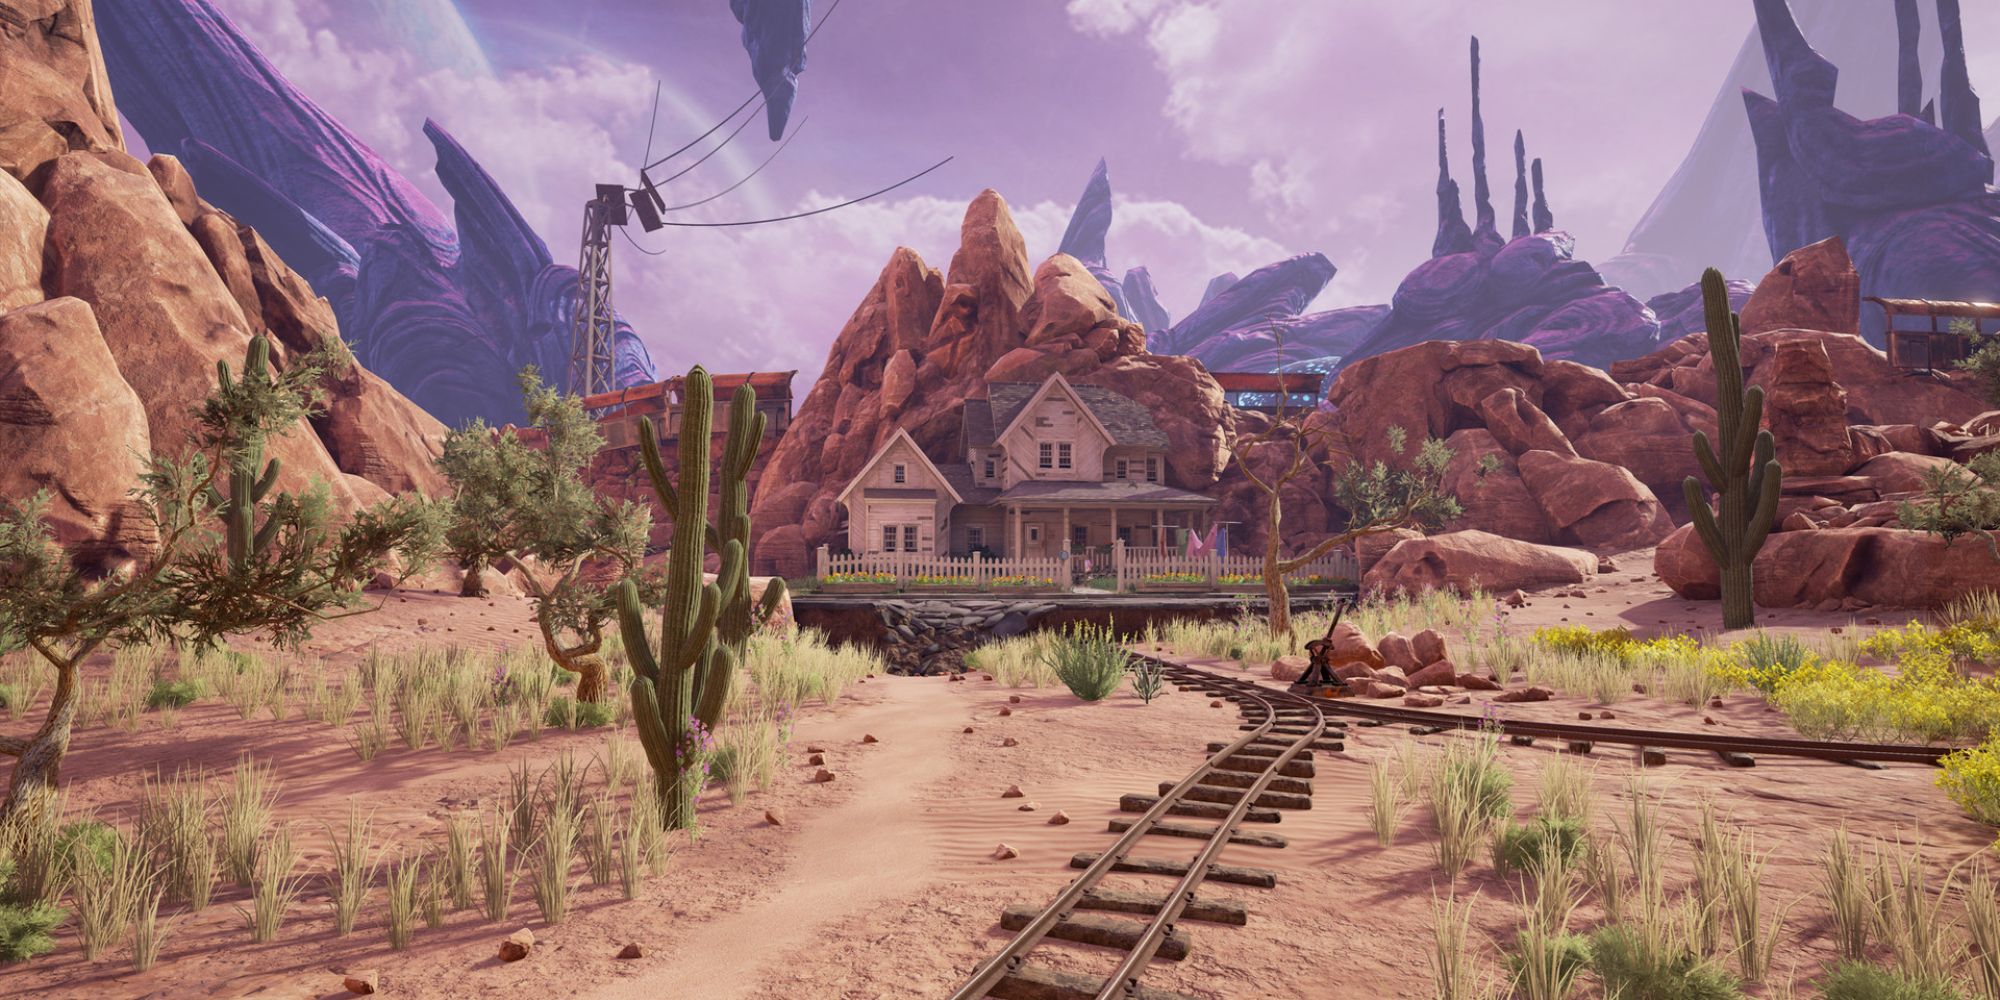 a wide shot of a house in a desert with a train track going towards it and strange happenings in the sky above